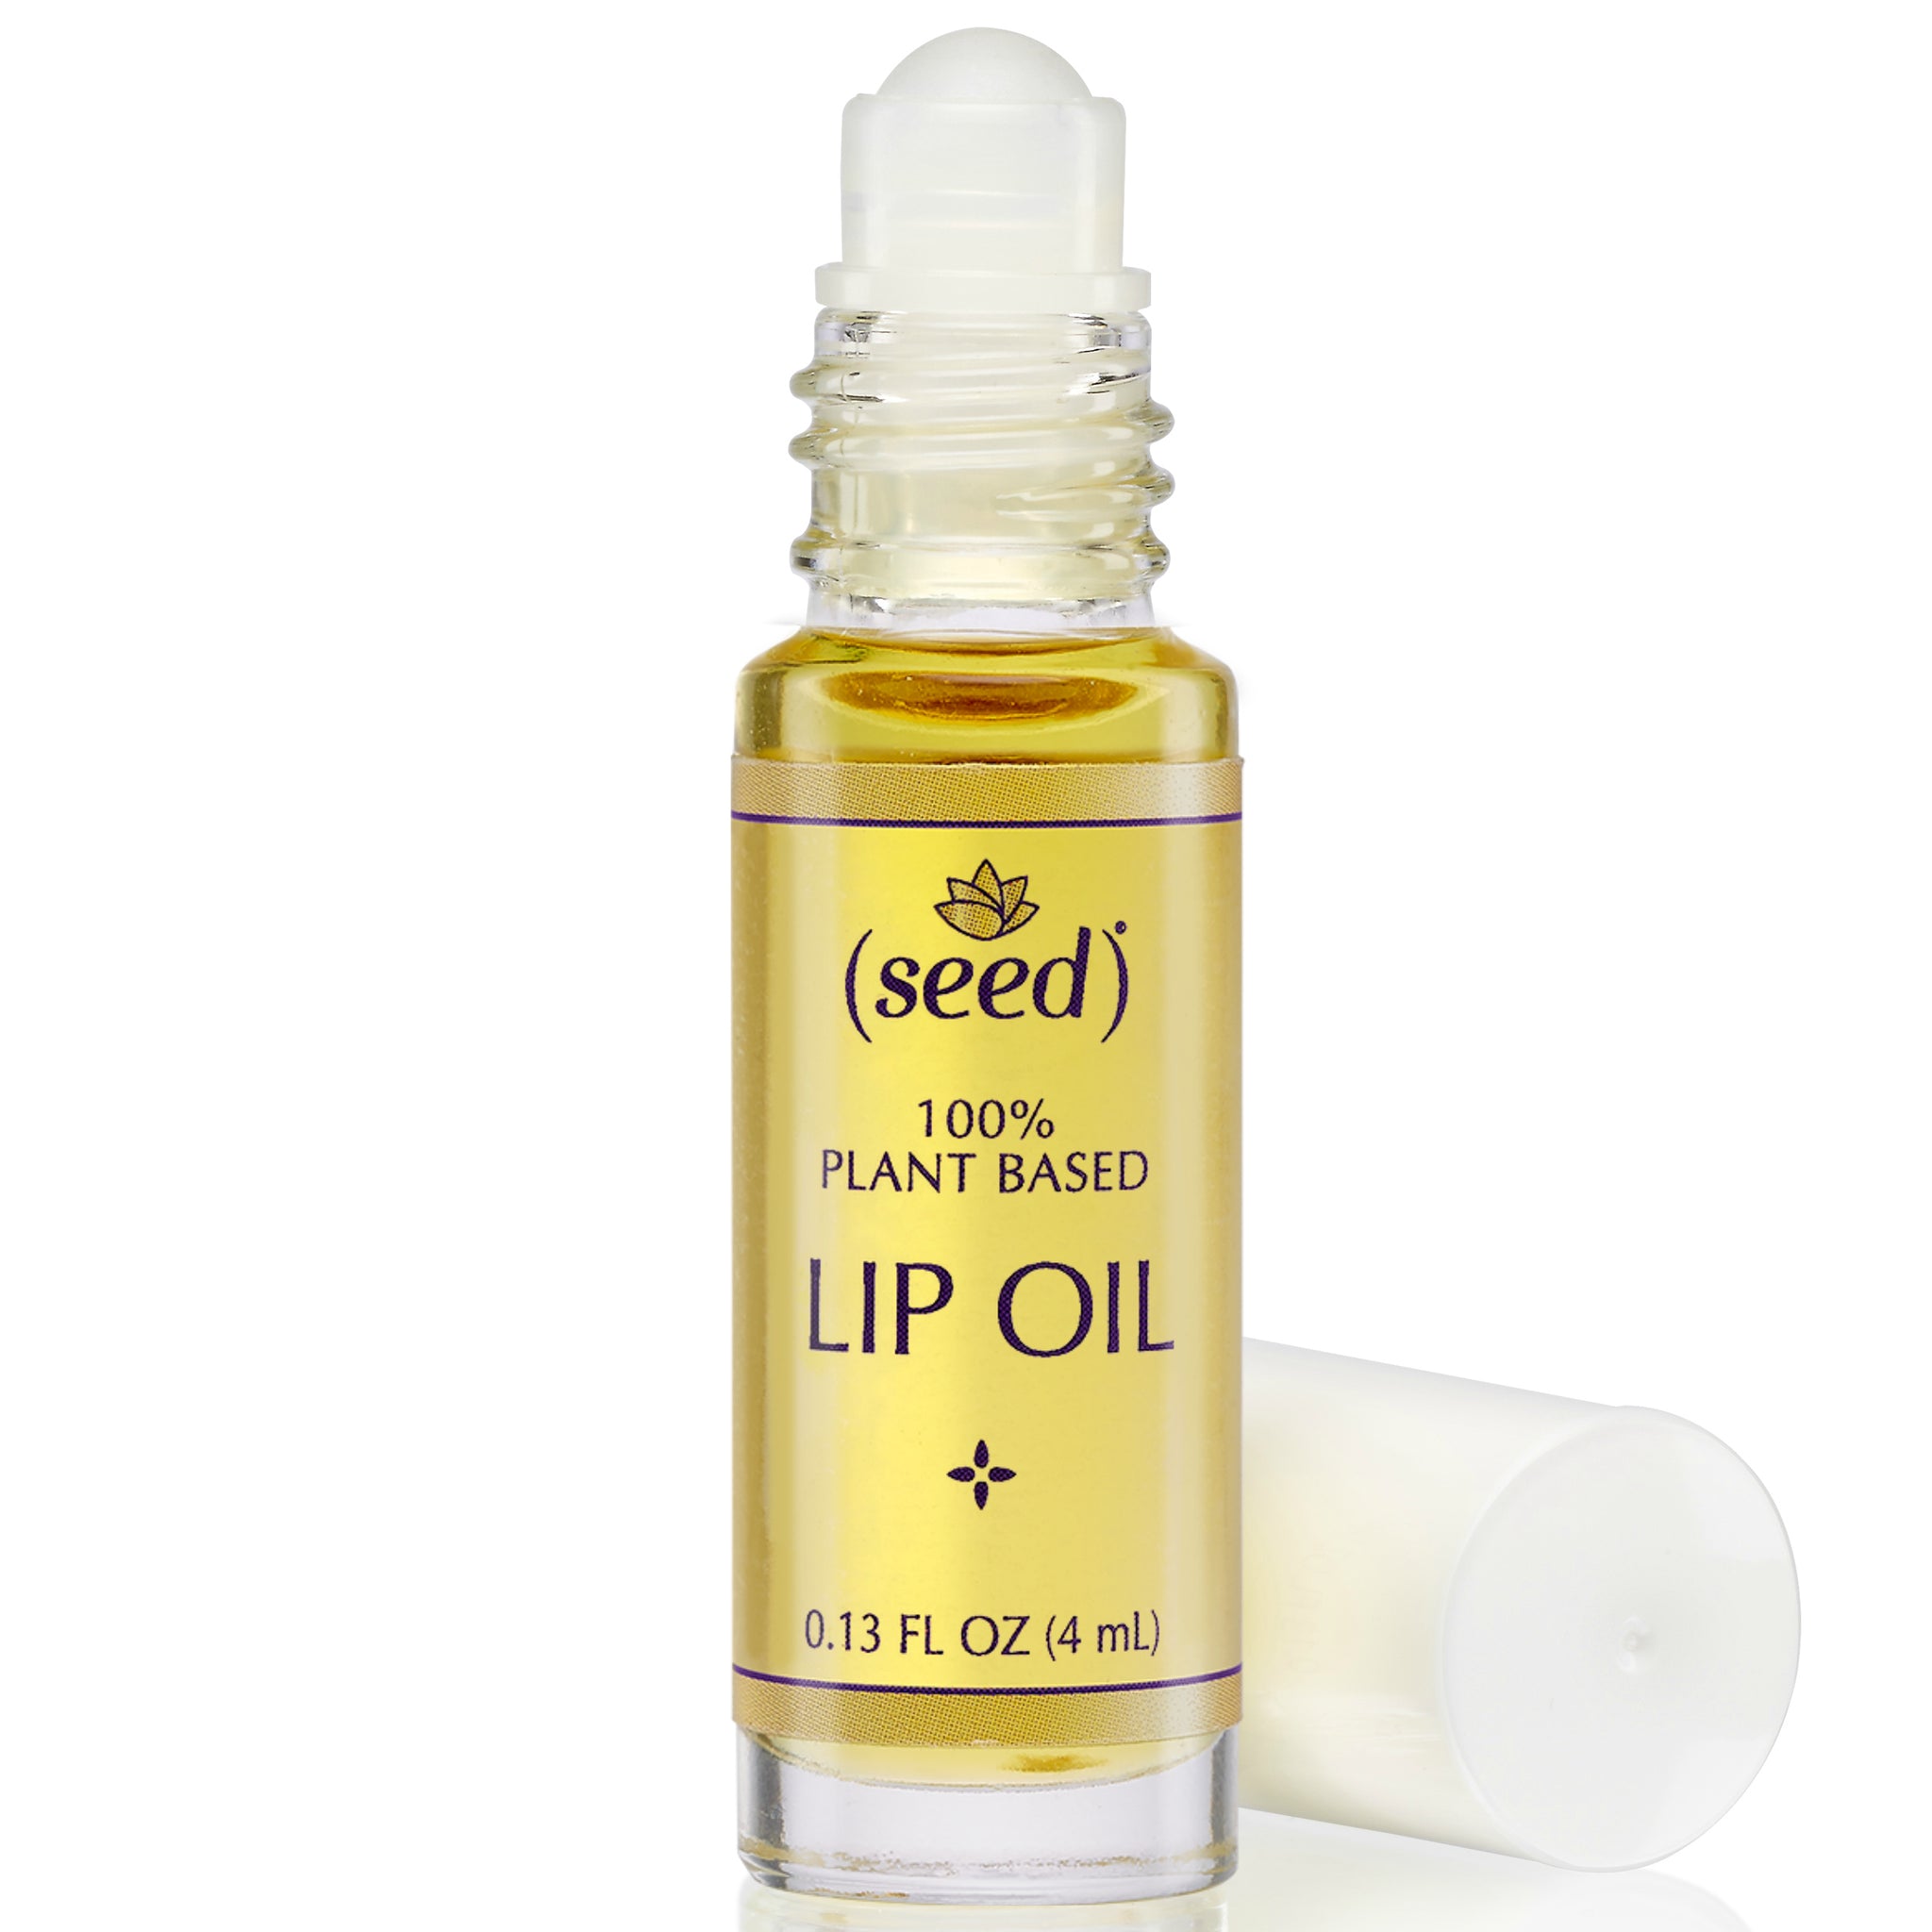 Seed 100% plant based Lip Oil with Gentle Roller Ball Applicator